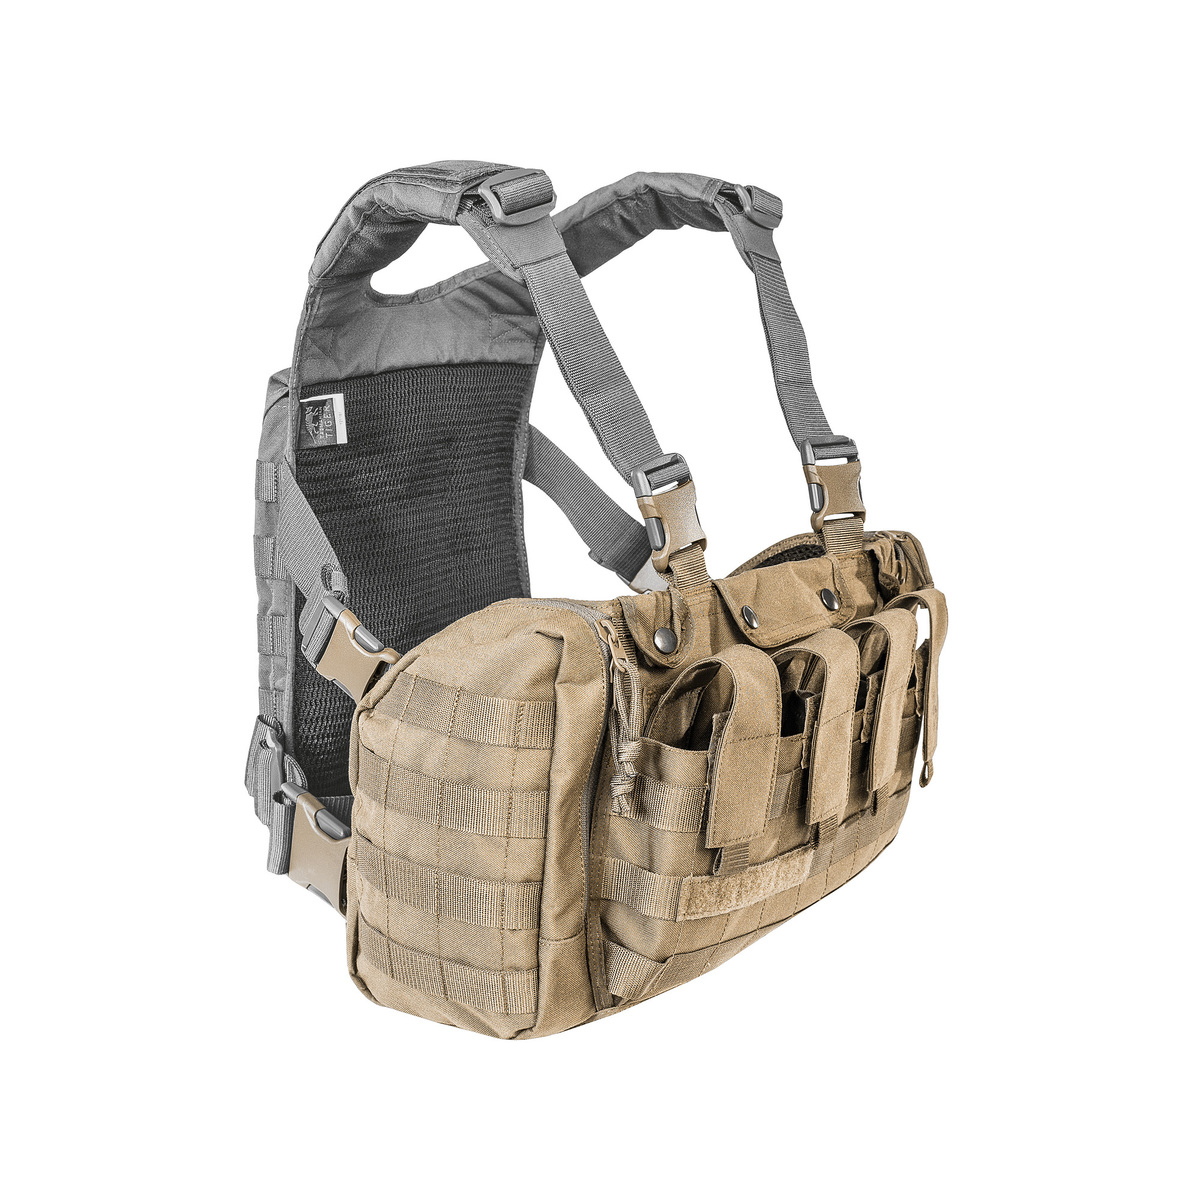 TT Chest Rig MKII - Harness with Side Pockets